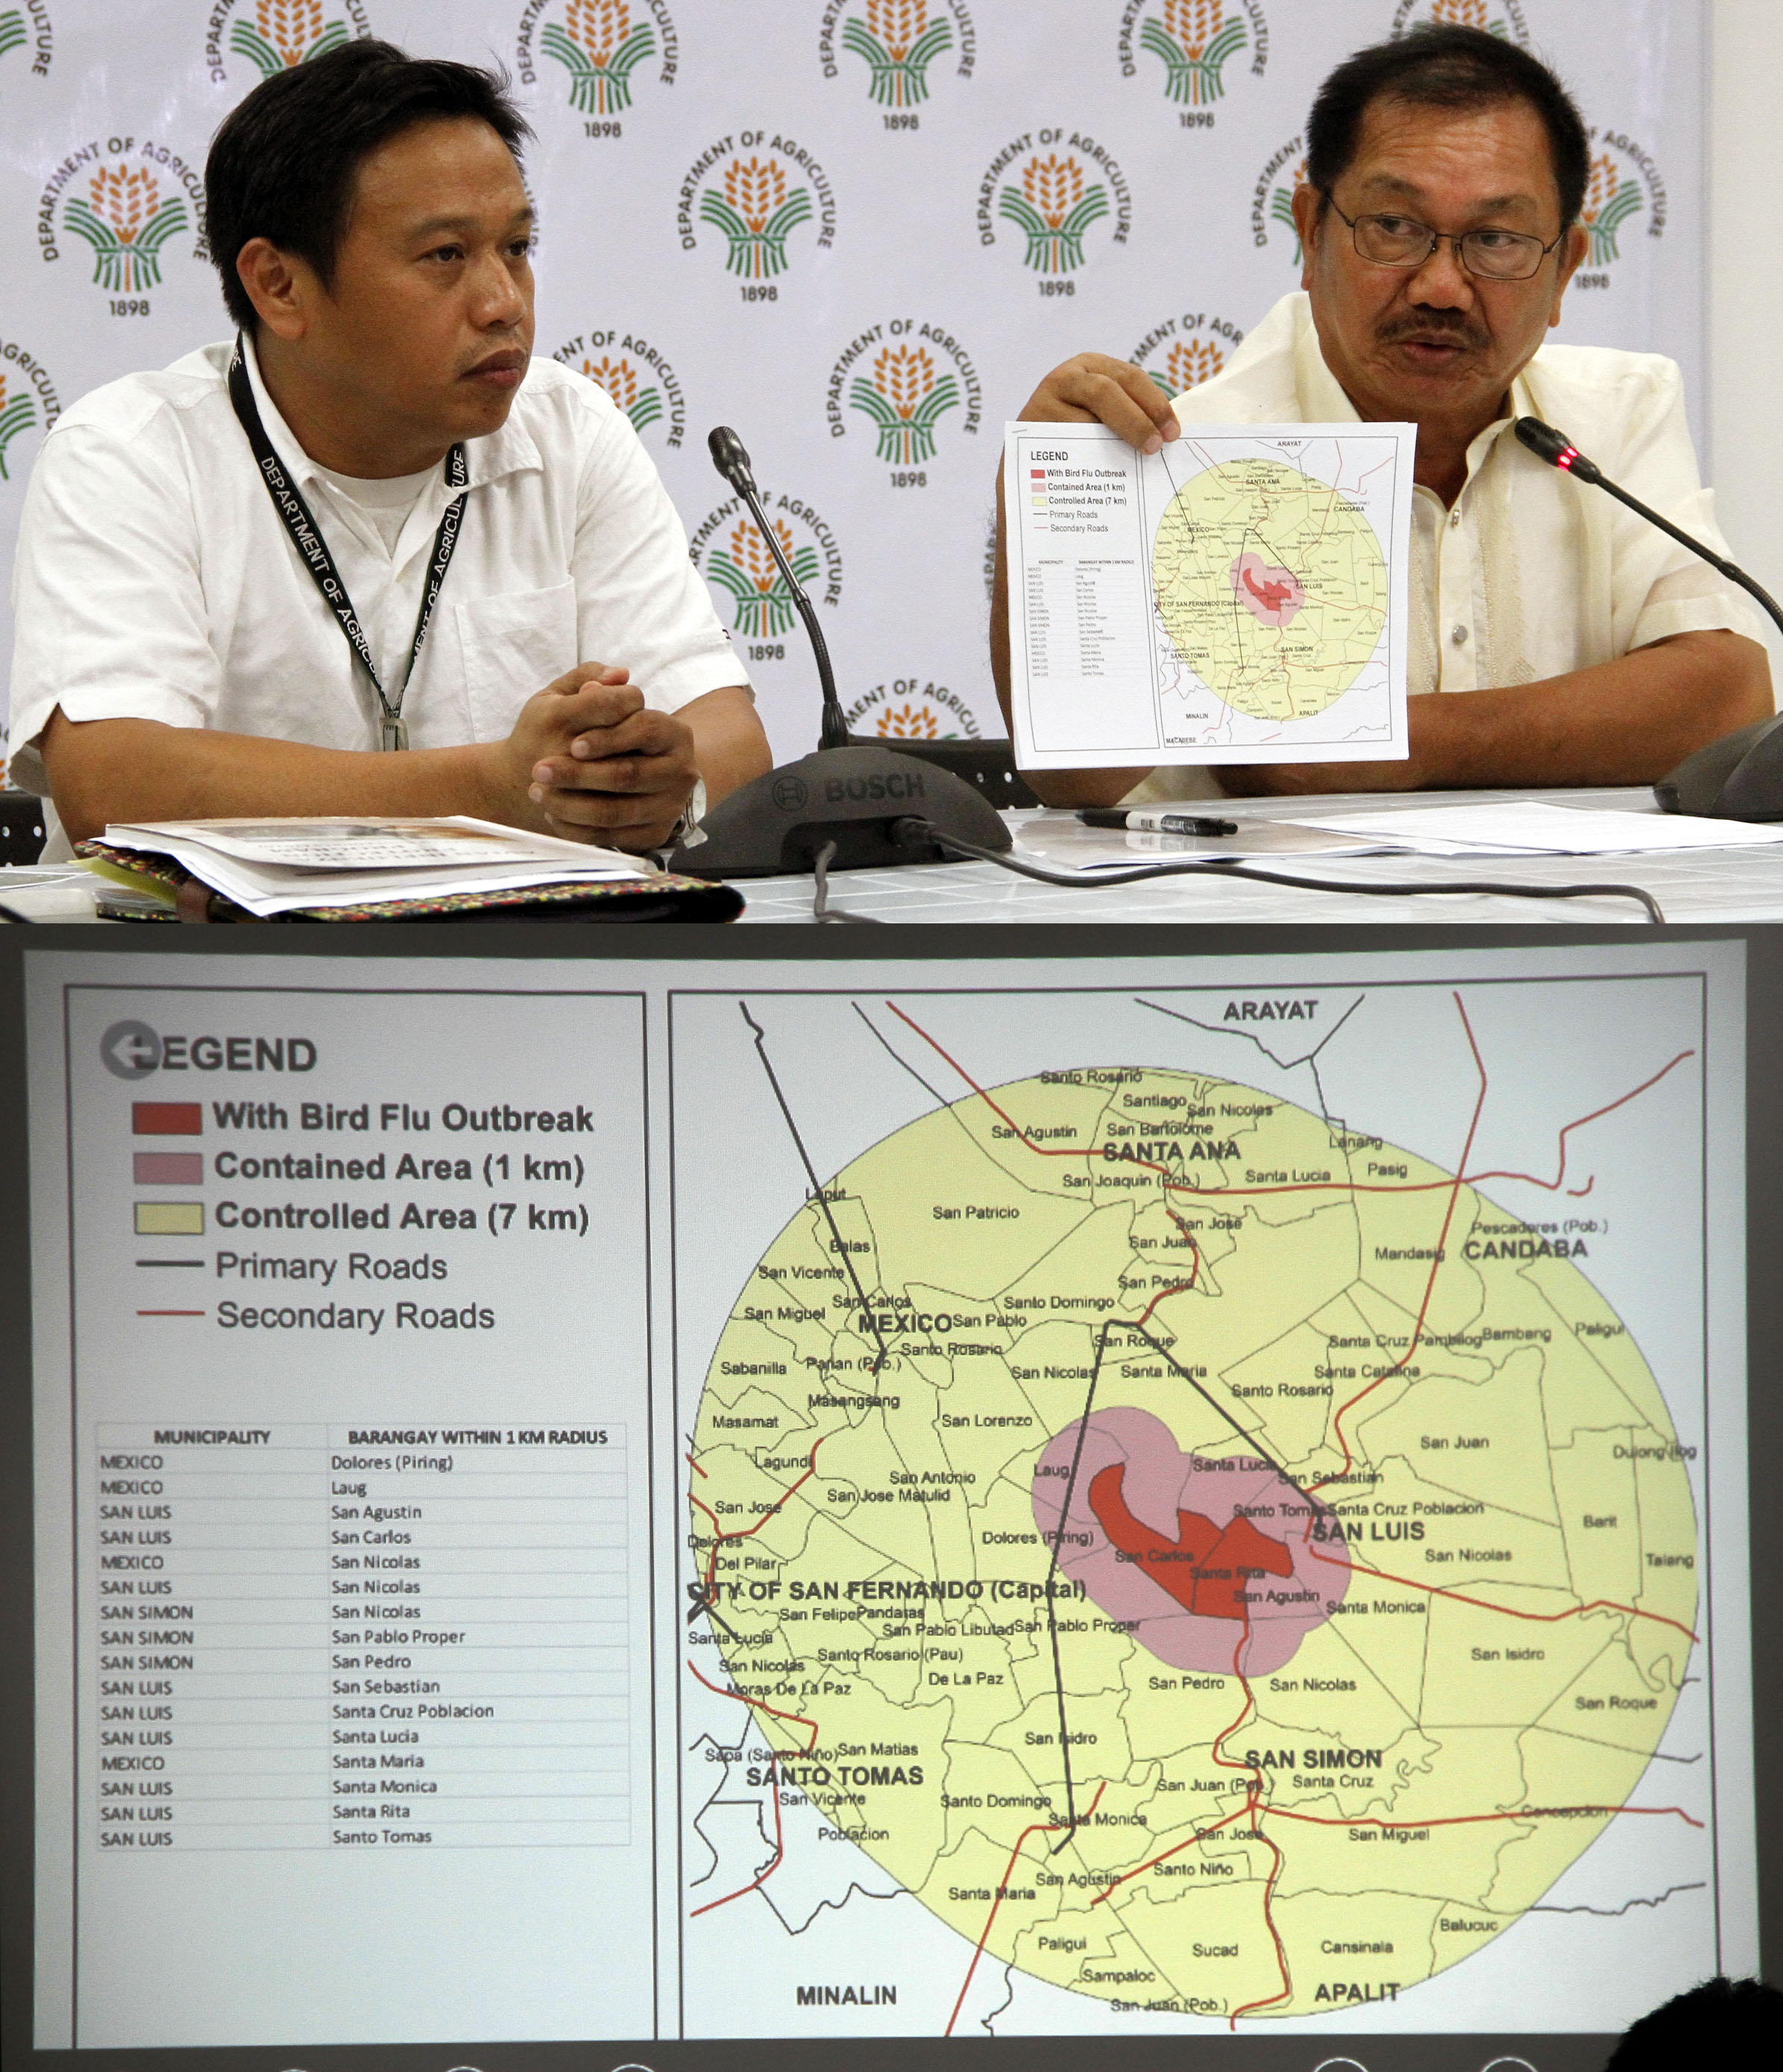 DA Sec. Piñol shows map of areas affected by avian flu outbreak